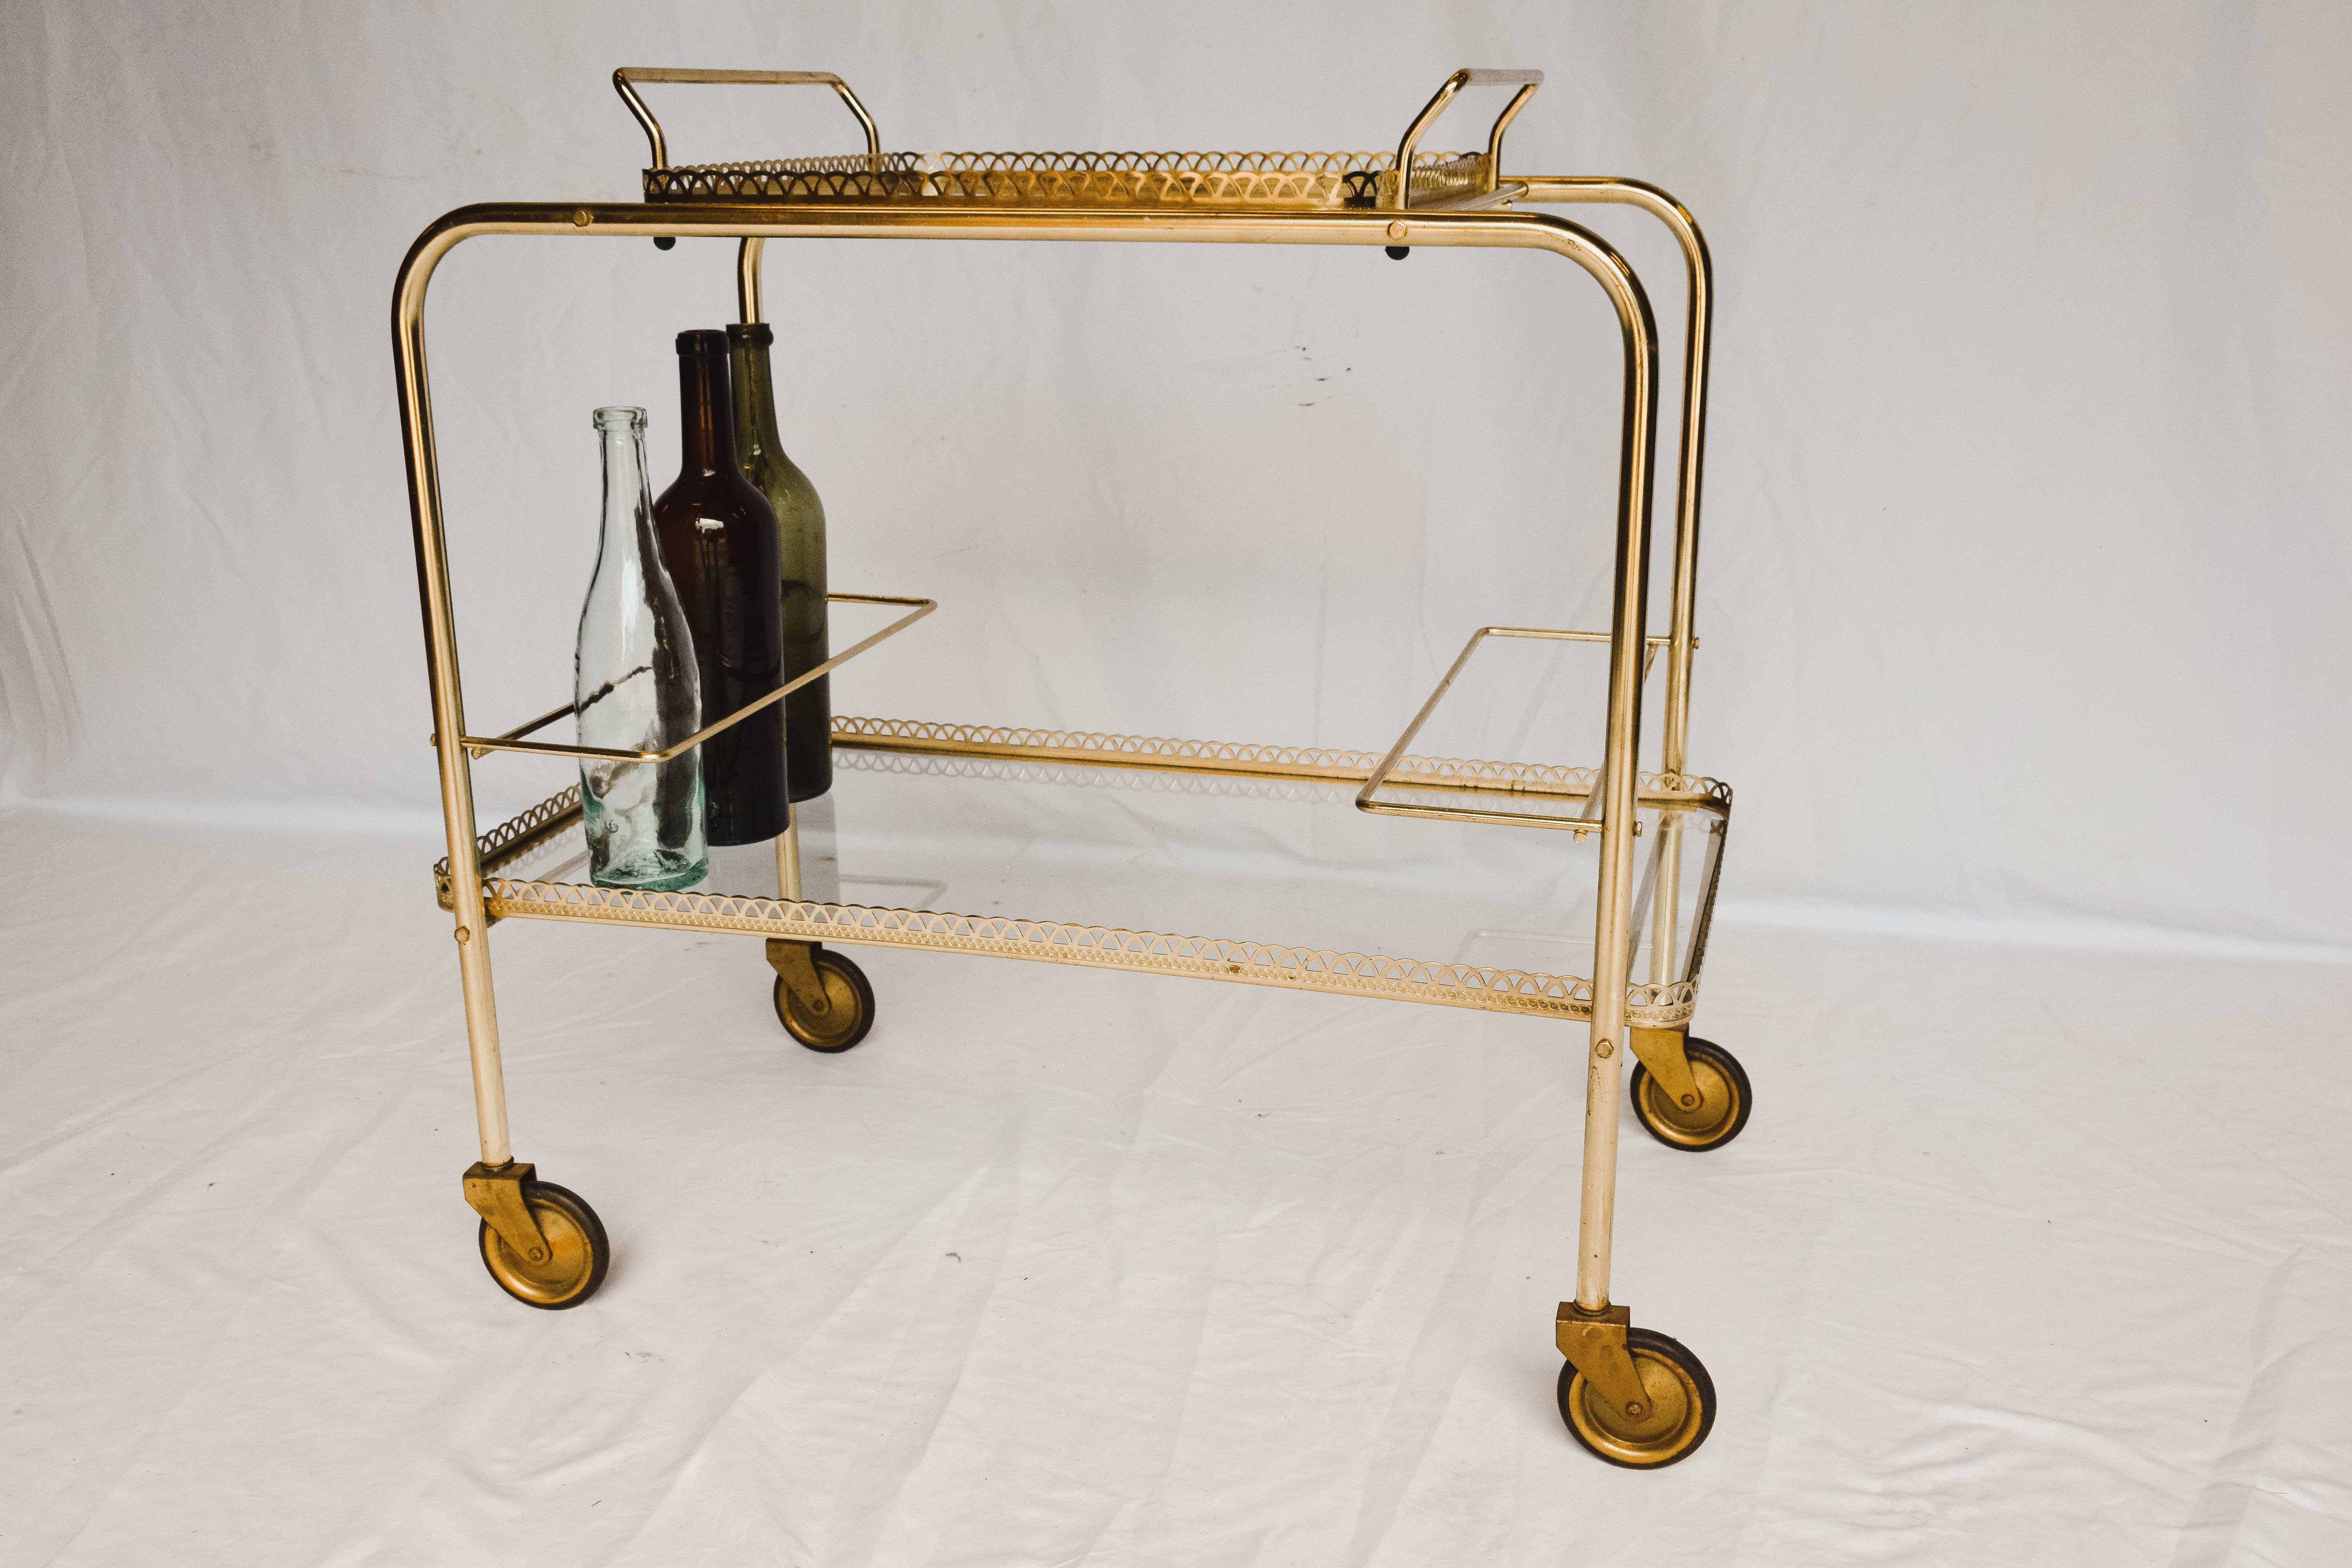 This Mid-Century Modern bar cart is sure to delight. Constructed of brass and glass bringing beauty to the midcentury design. The two glass tiers provides ample space for all your bar needs. The top tray lifts off for additional service. It also has